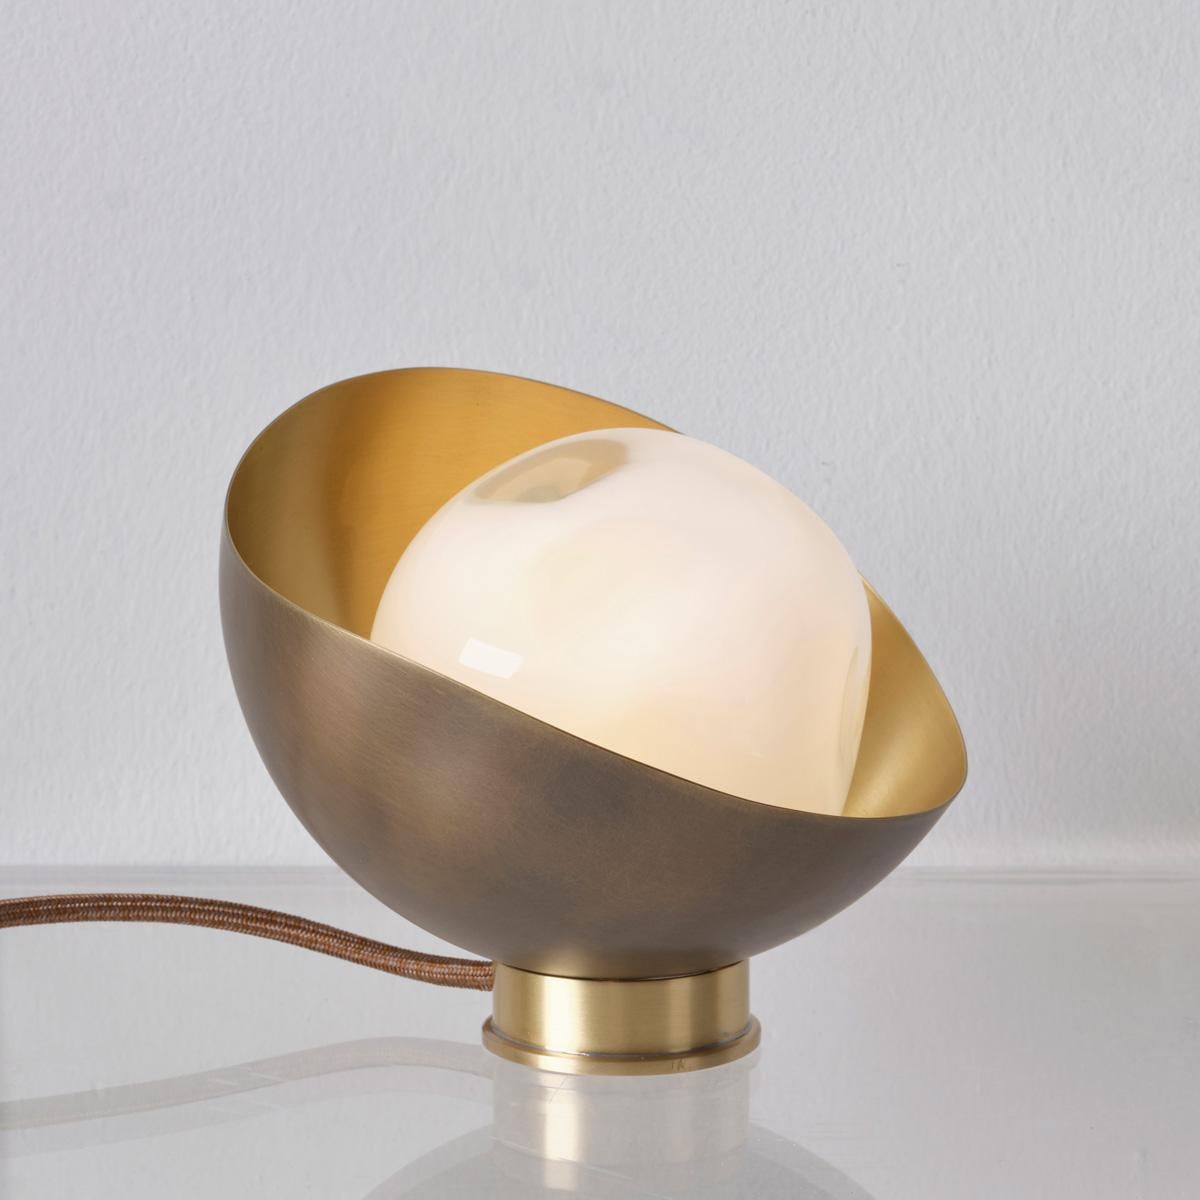 The Perla Mini table lamp is the smallest member of the Perla collection featuring an organic brass shell nestling our Sfera glass handblown in Murano. See the Perla and Perla Grande for larger models.

The primary images show it in Bronzo Nuvolato 